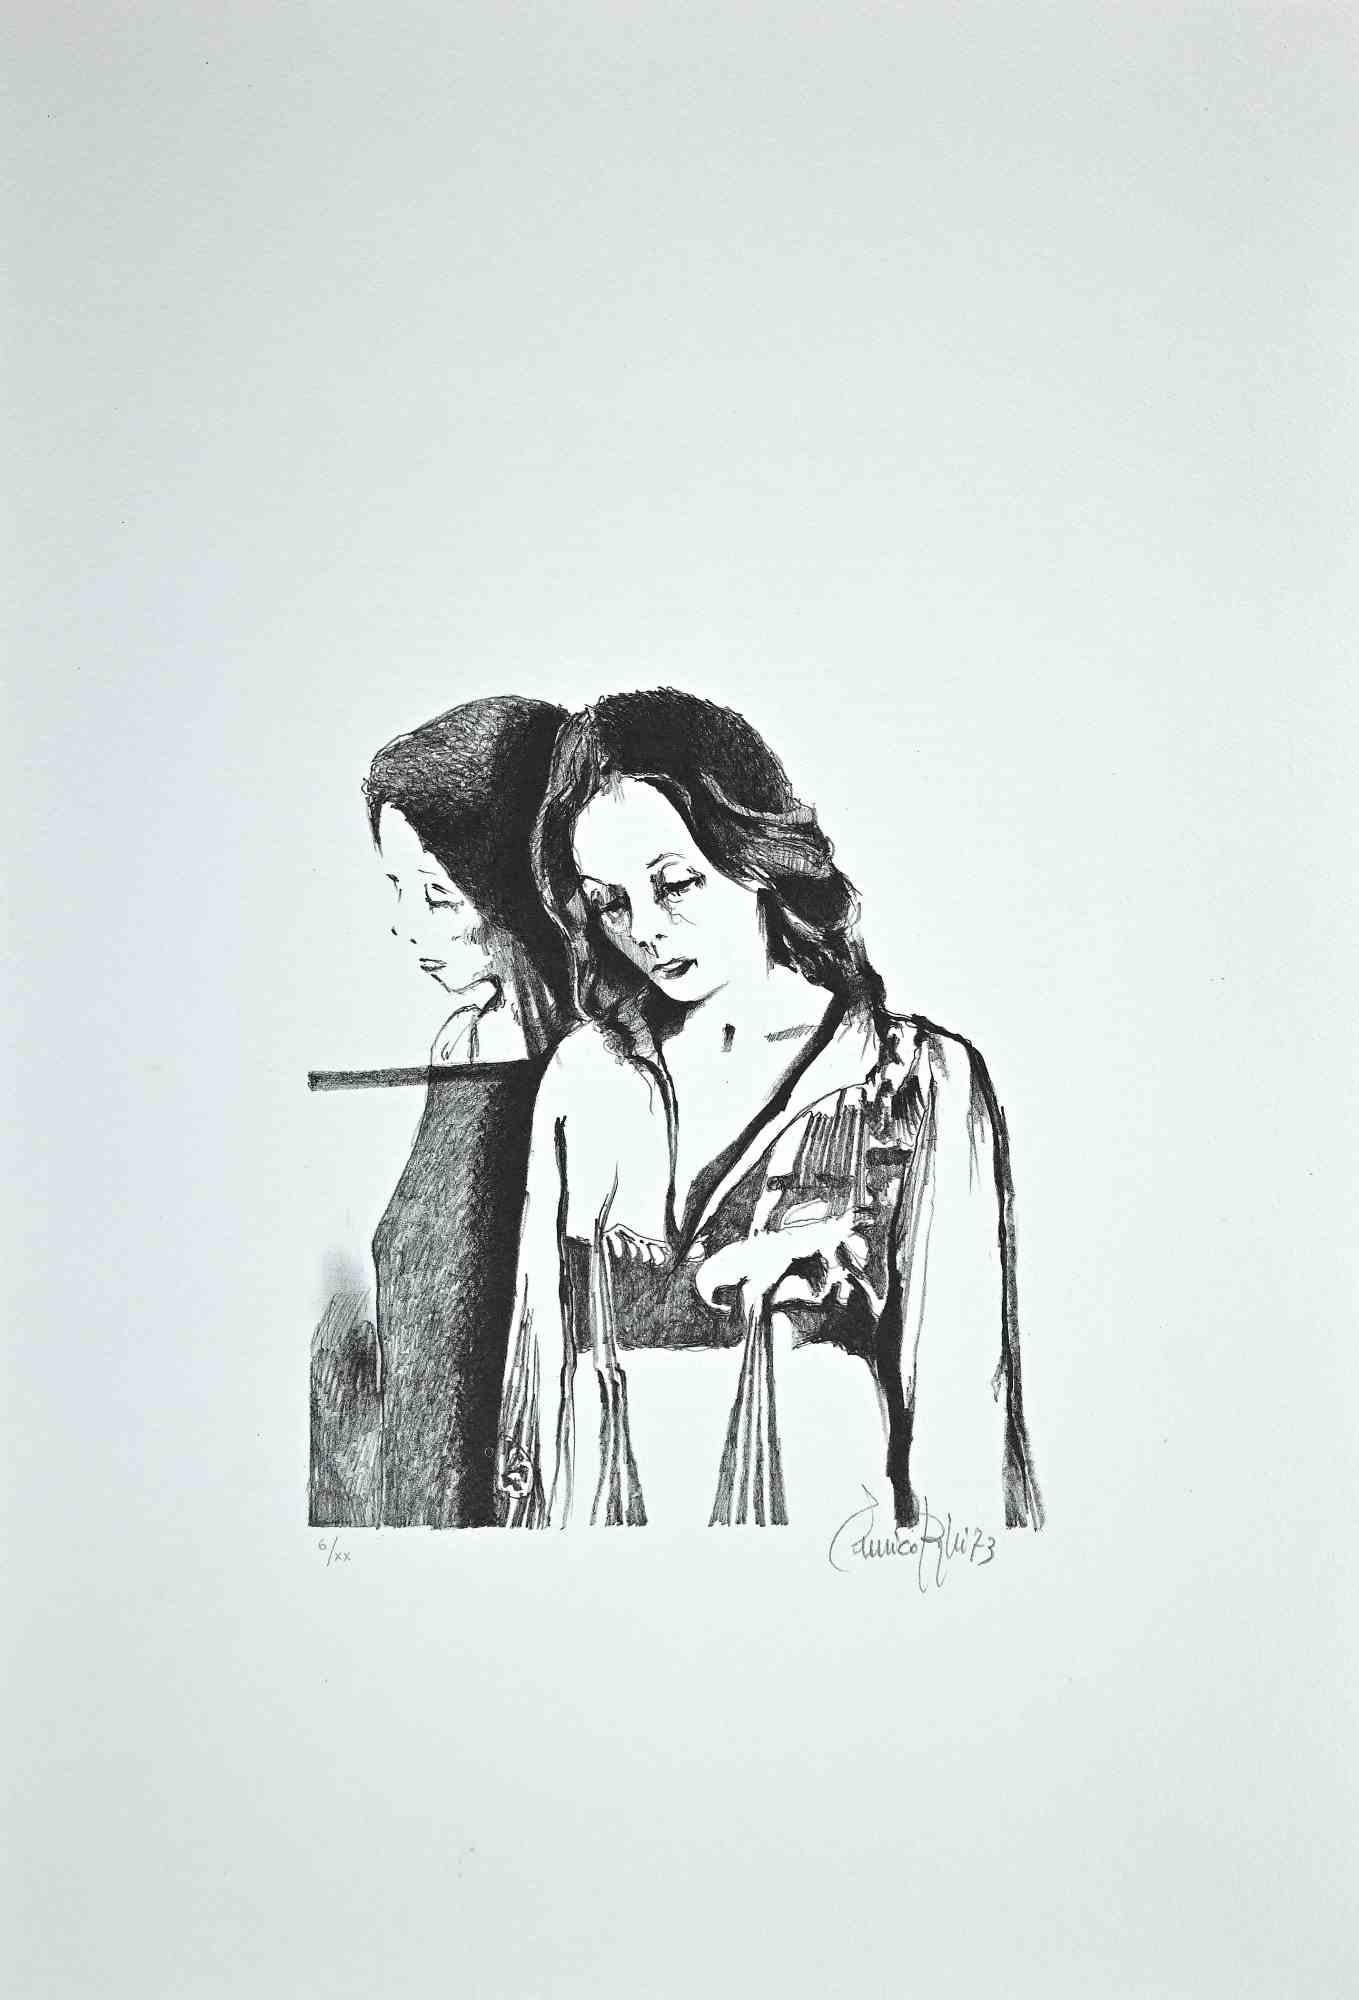 The Woman is an original lithograph on paper, realized by the Italian artist Enrico Borghi.

In good condition.

Hand-signed.

Numbered. Edition, 6/XX.

This contemporary piece is depicted through strong lines and intense black and white, which made